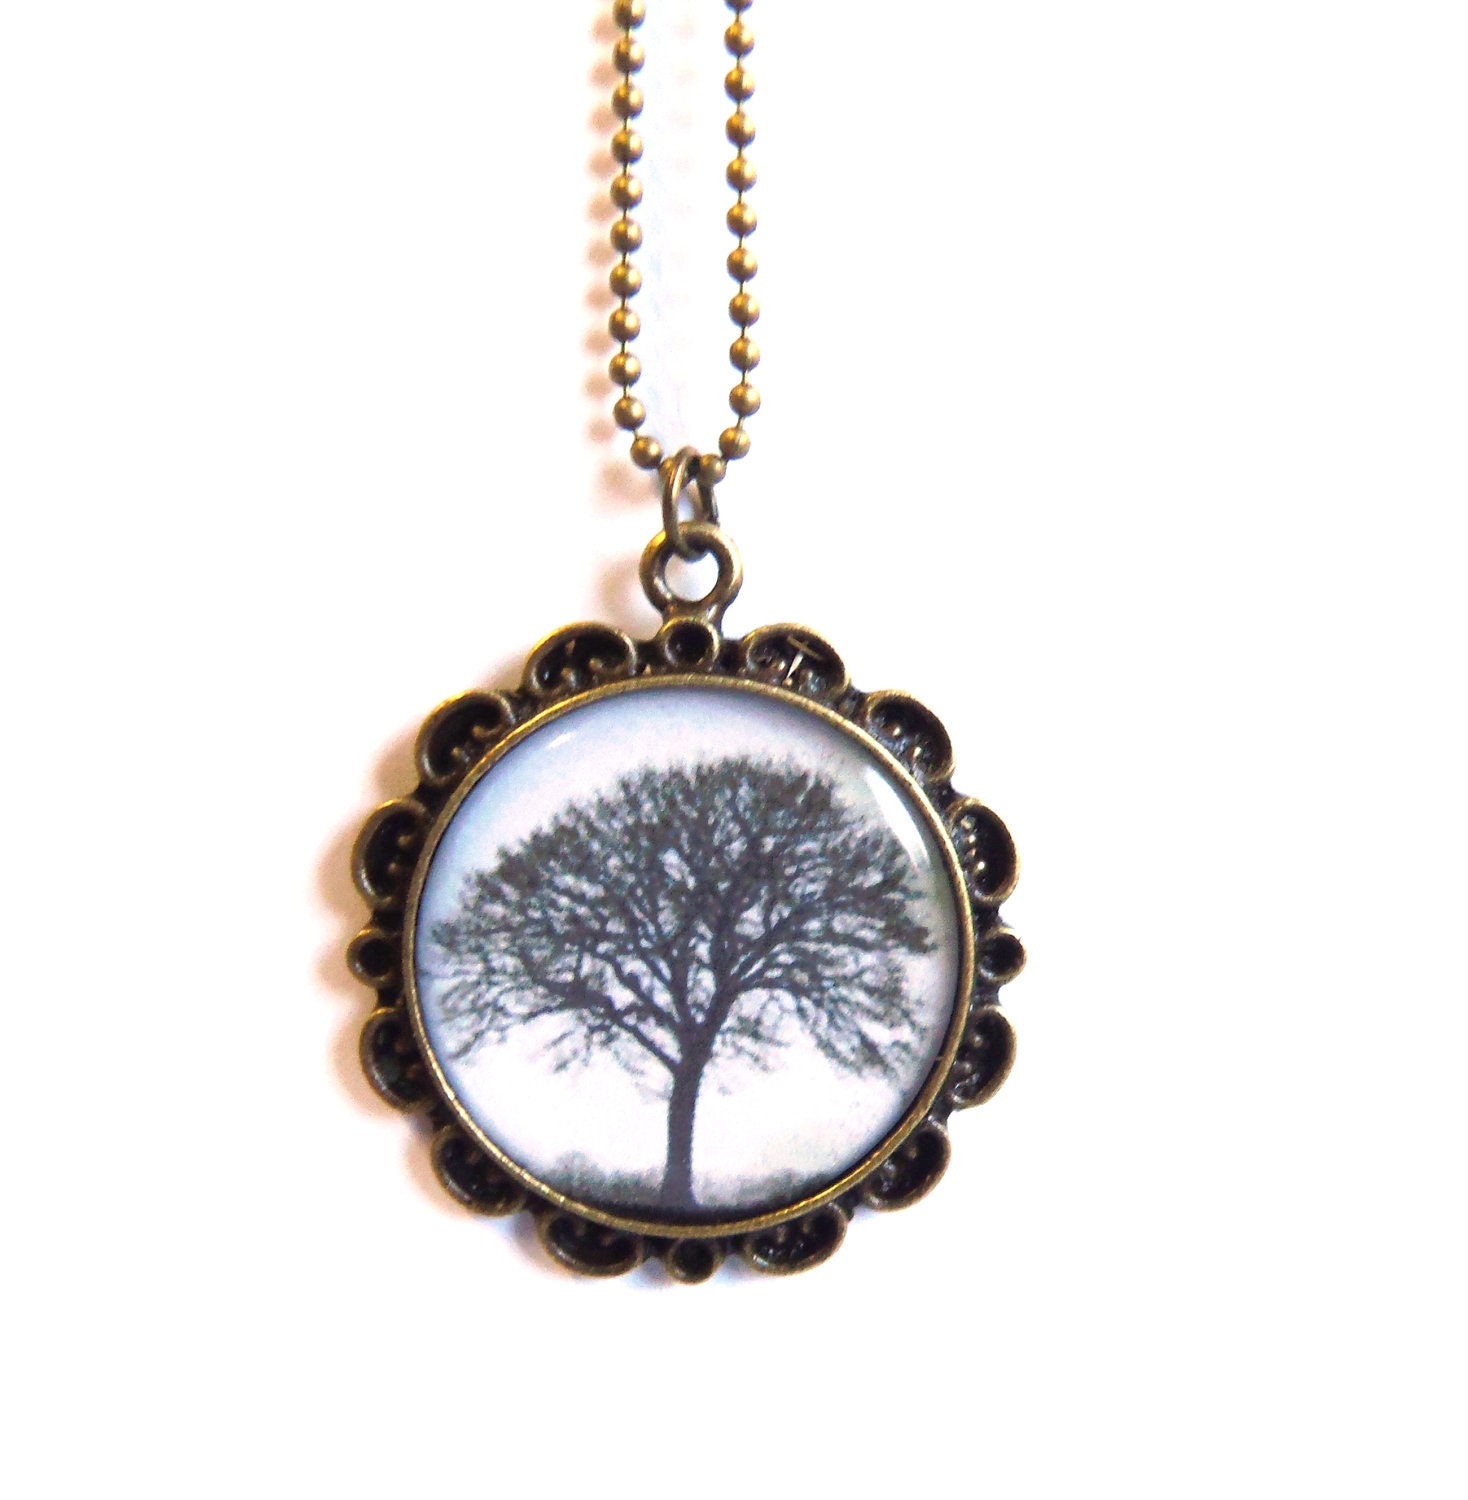 Tree necklace with antique brass floral pendant base - agatechristina